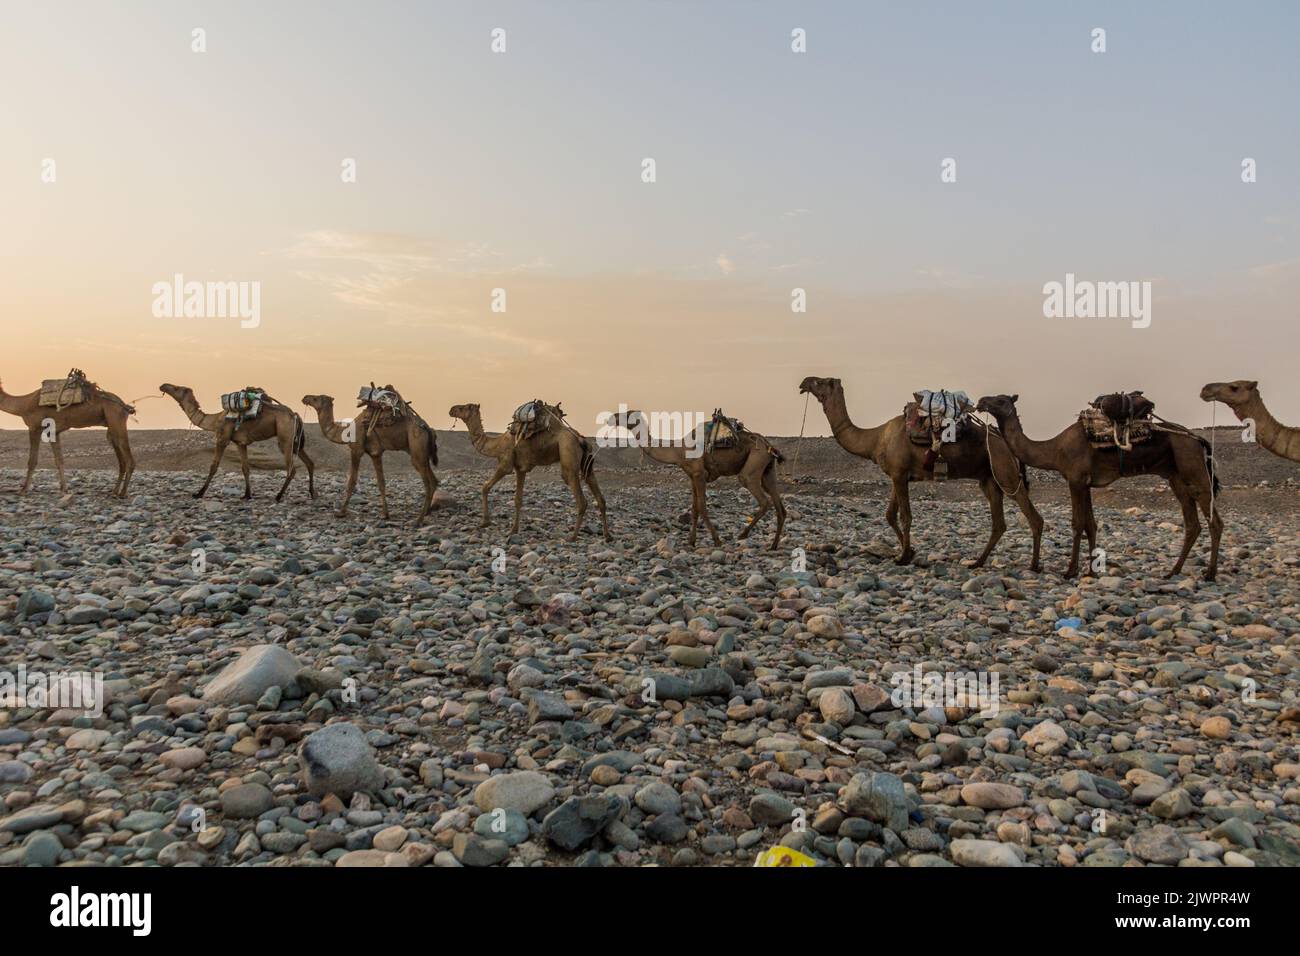 Morning view of a camel caravan in Hamed Ela, Afar tribe settlement in the Danakil depression, Ethiopia. This caravan head to the salt mines. Stock Photo